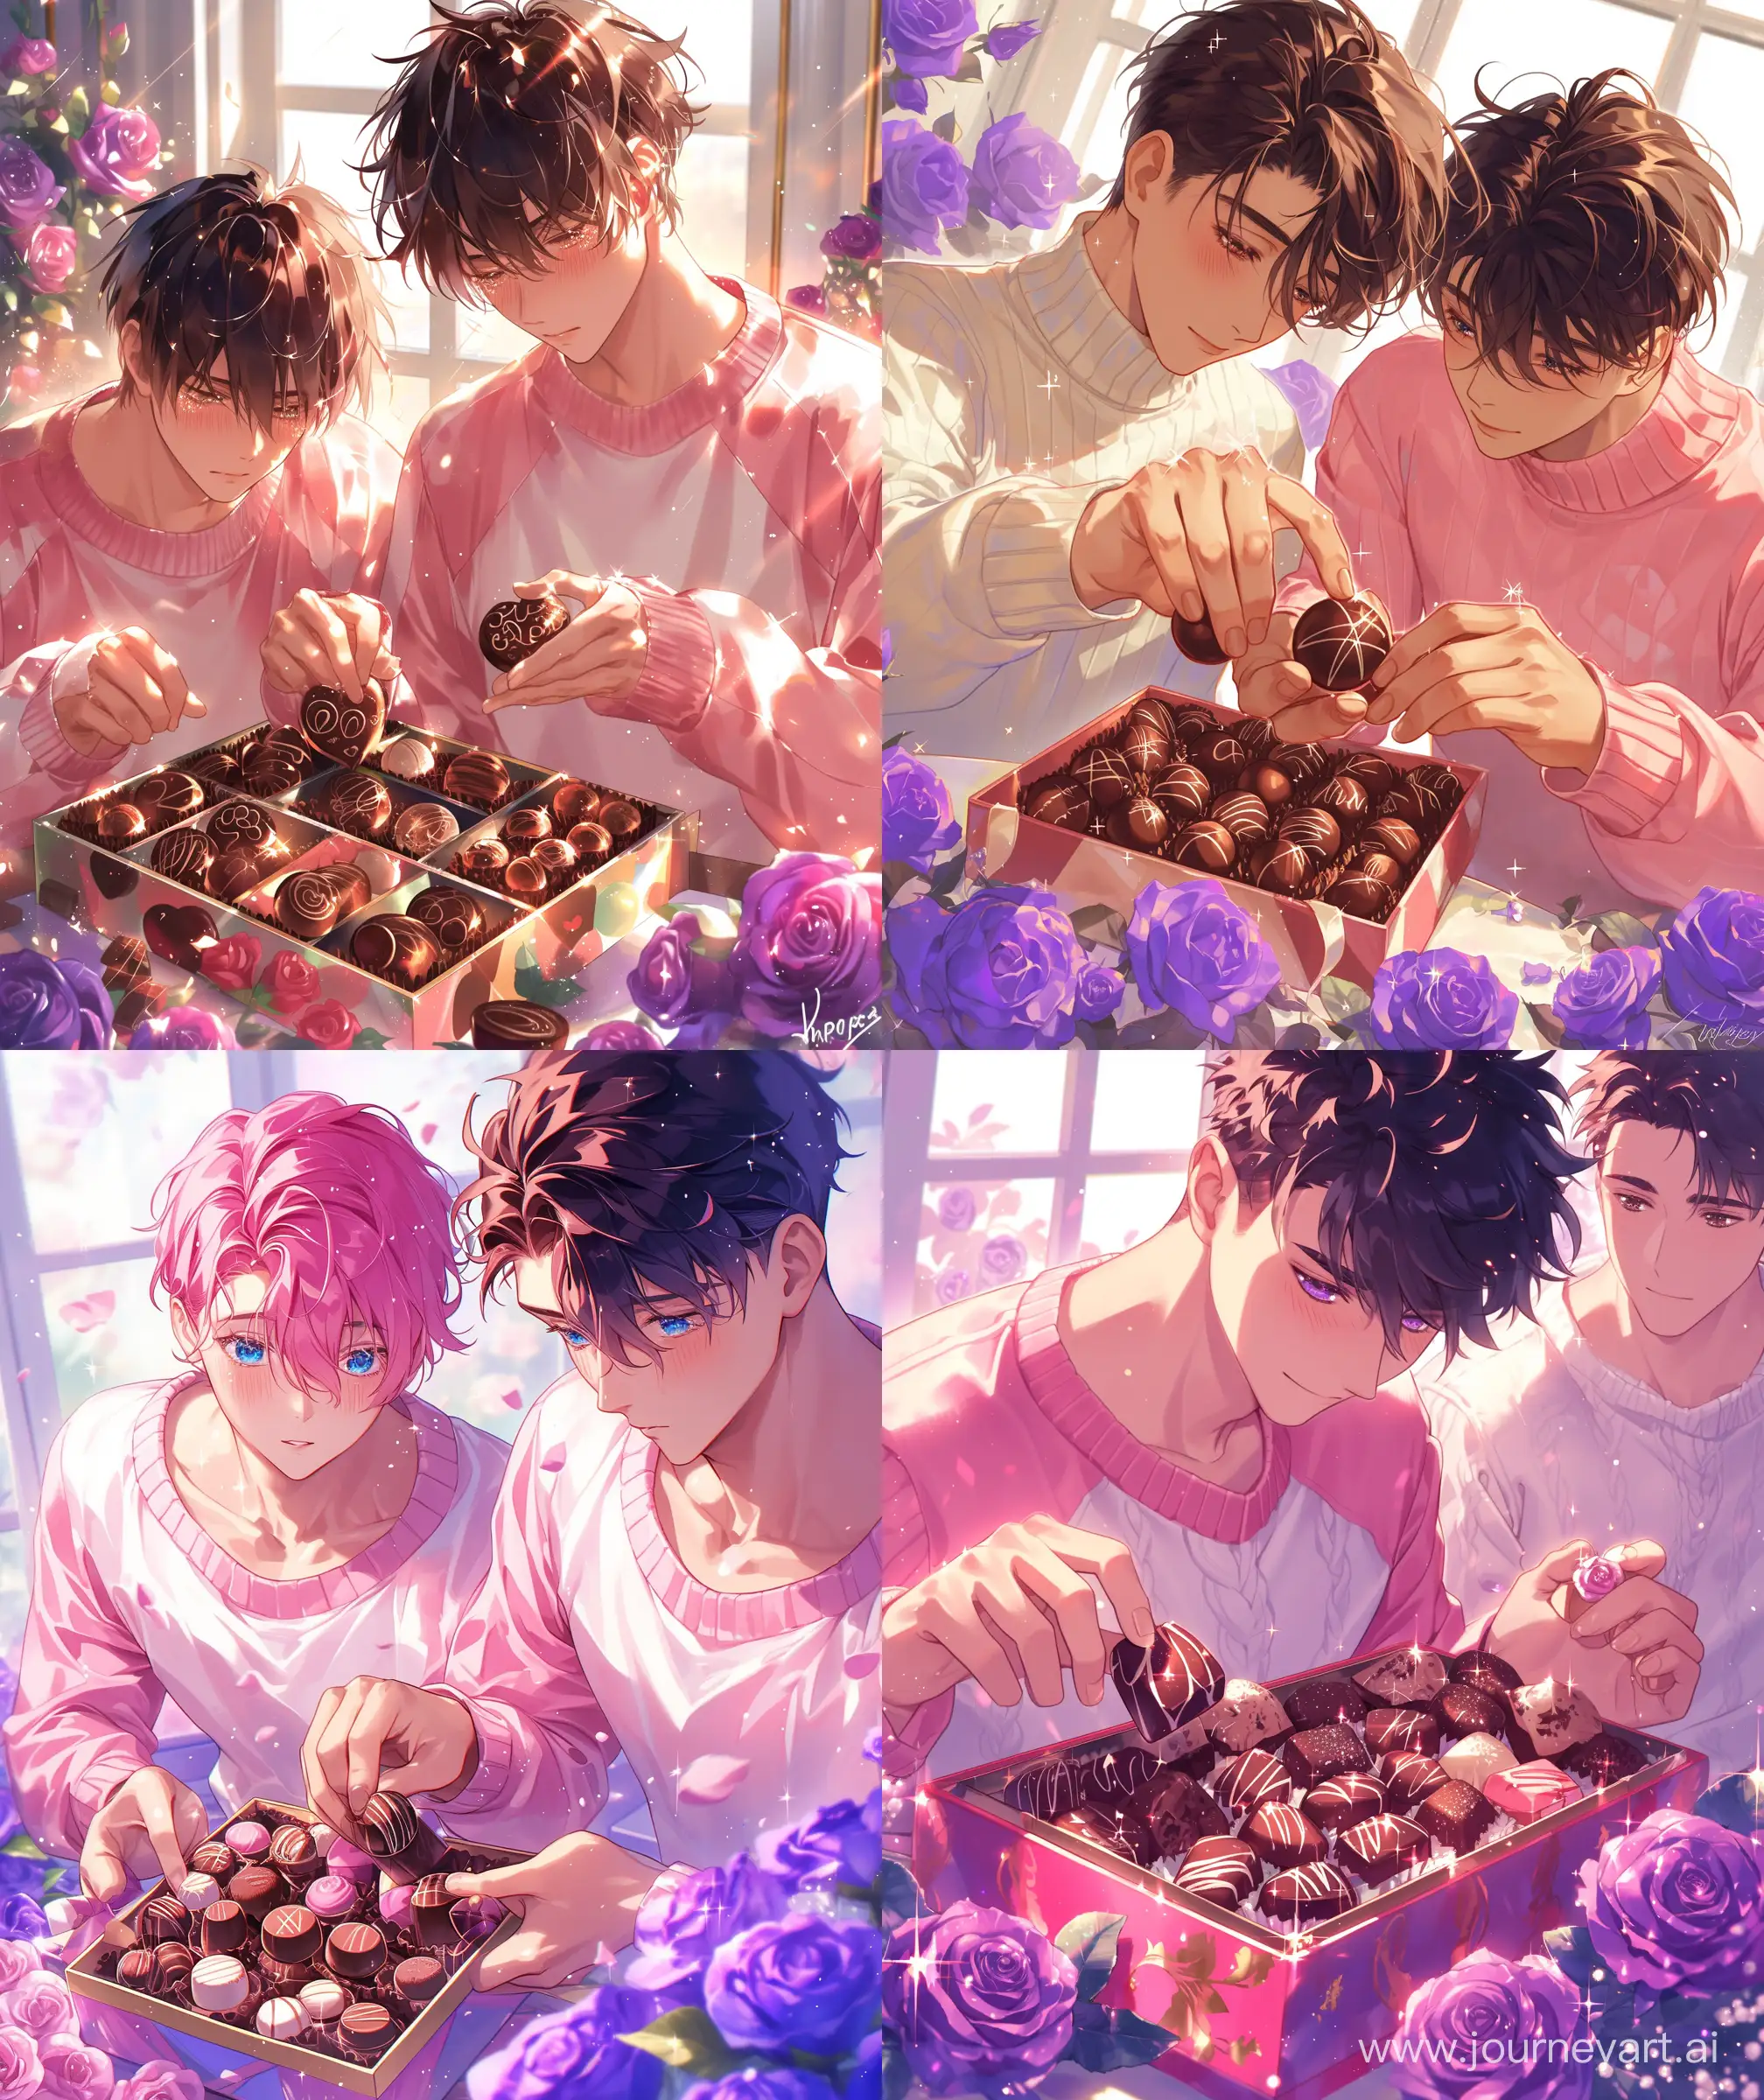 Anime style handsome two young men , decorating box of chocolates, many chocolates, wearing pink and white sweater, romantic, purple flowers, purple rose, lovey look, glistening, upper body look, ultra hd, High quality --ar 27:32 --niji 6